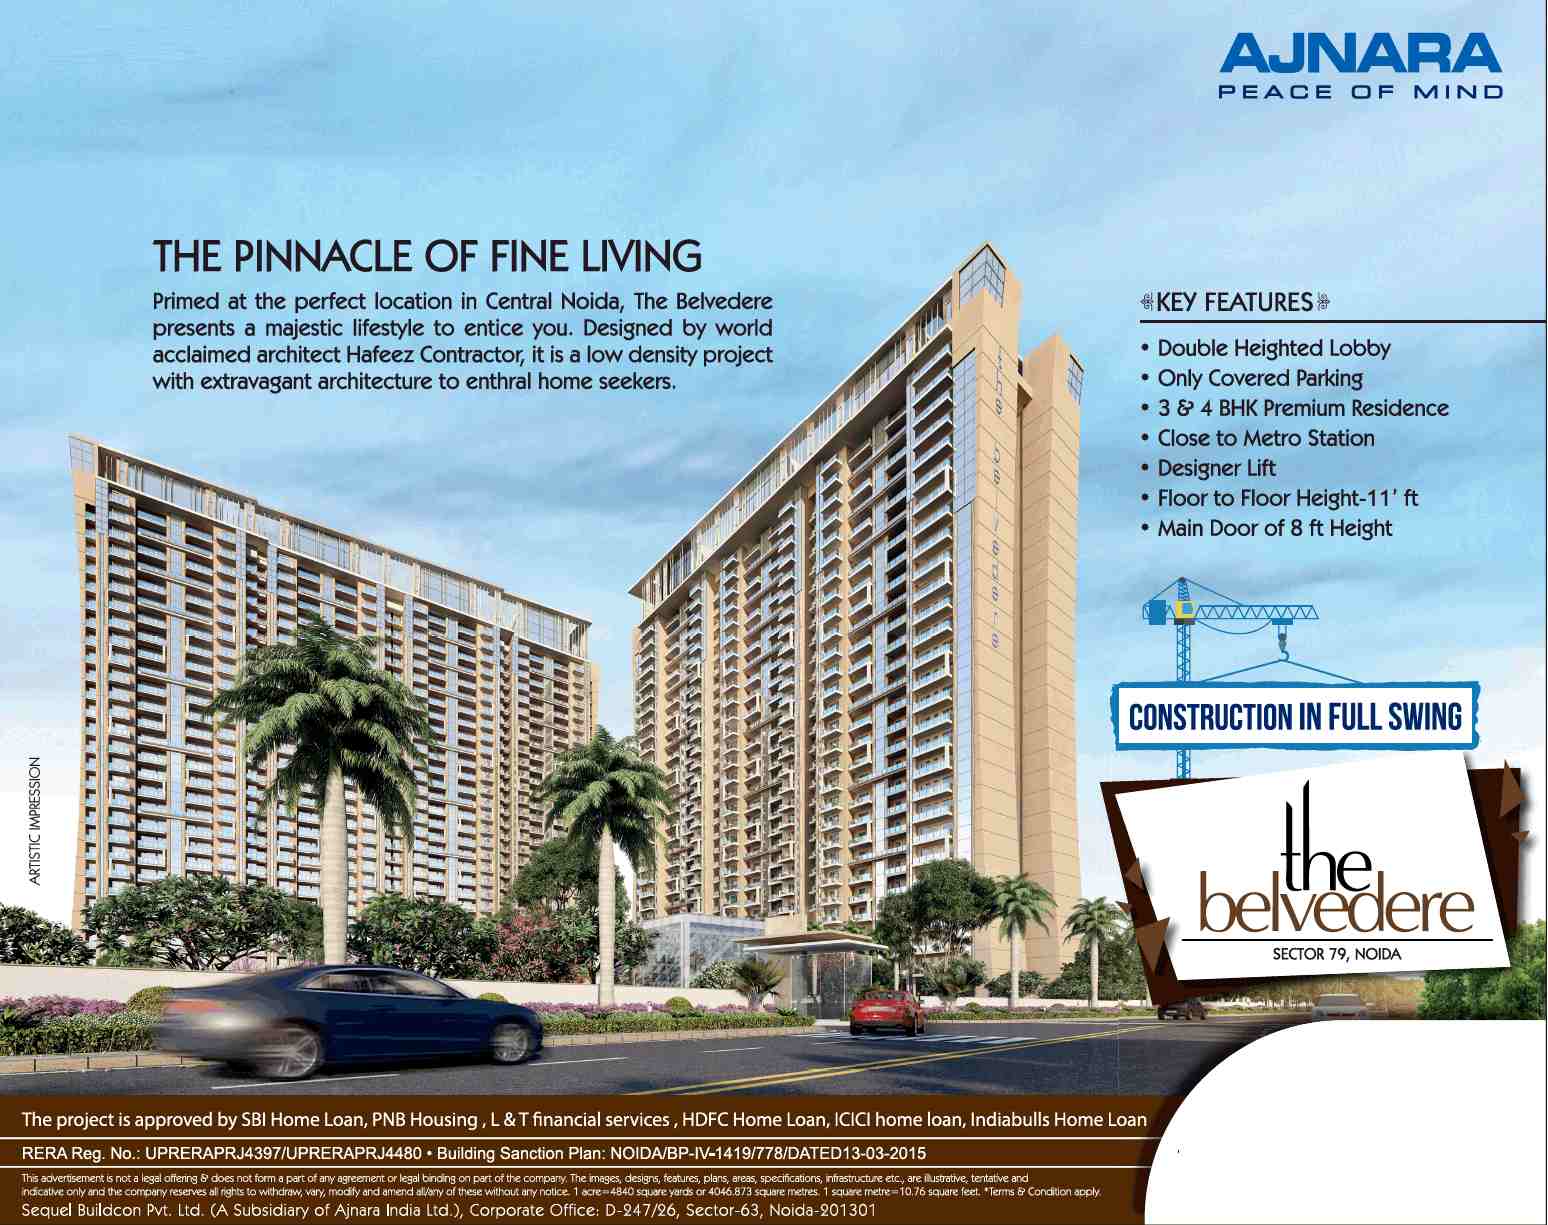 Presenting a majestic lifestyle to entice you at Ajnara The Belvedere in Noida Update